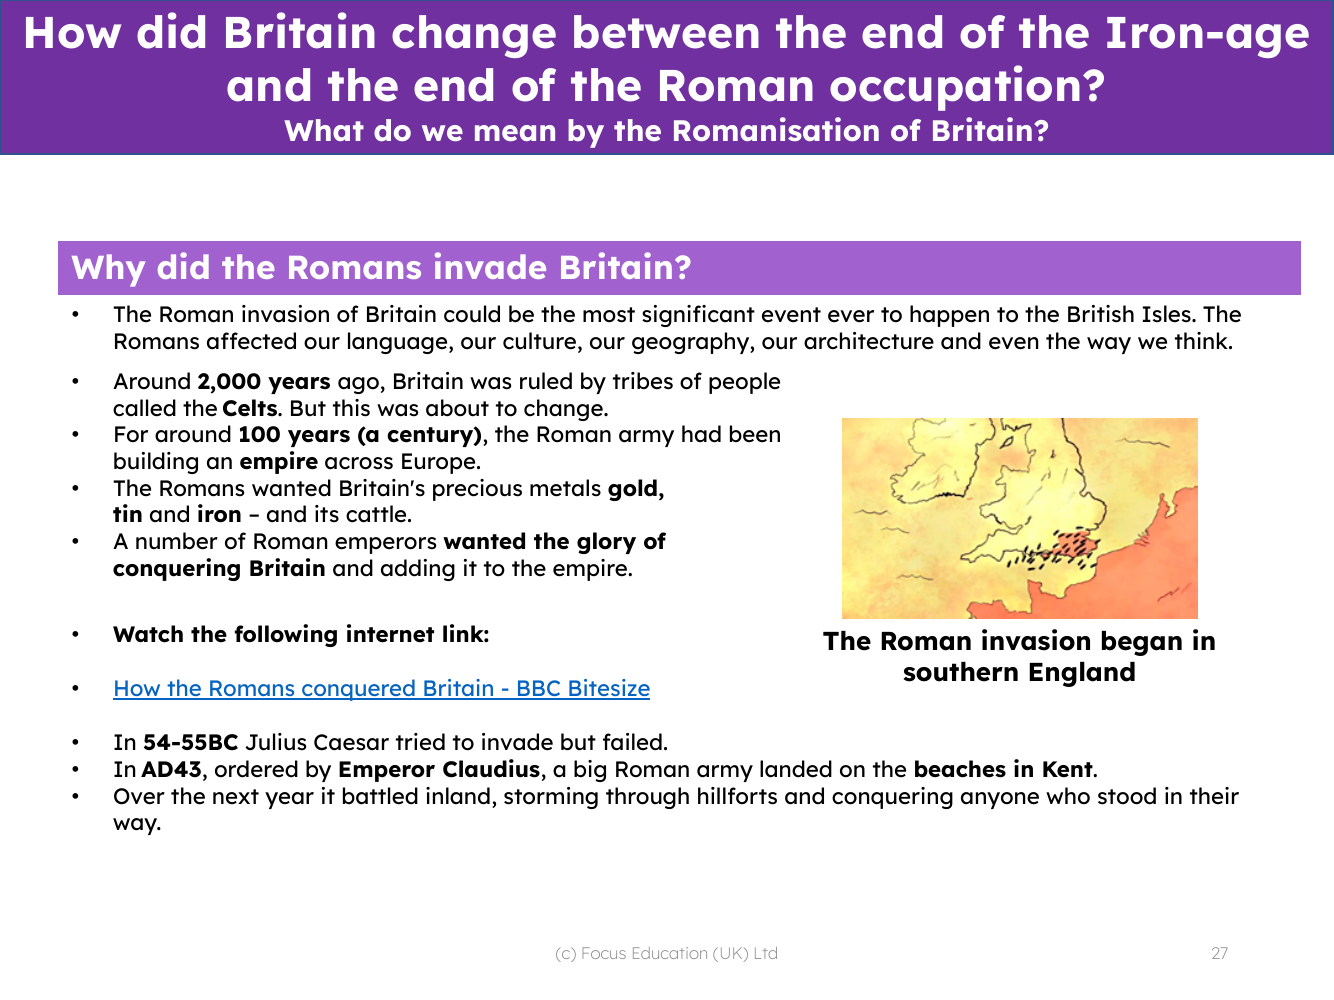 Why did the Romans invade Britain? - Info sheet